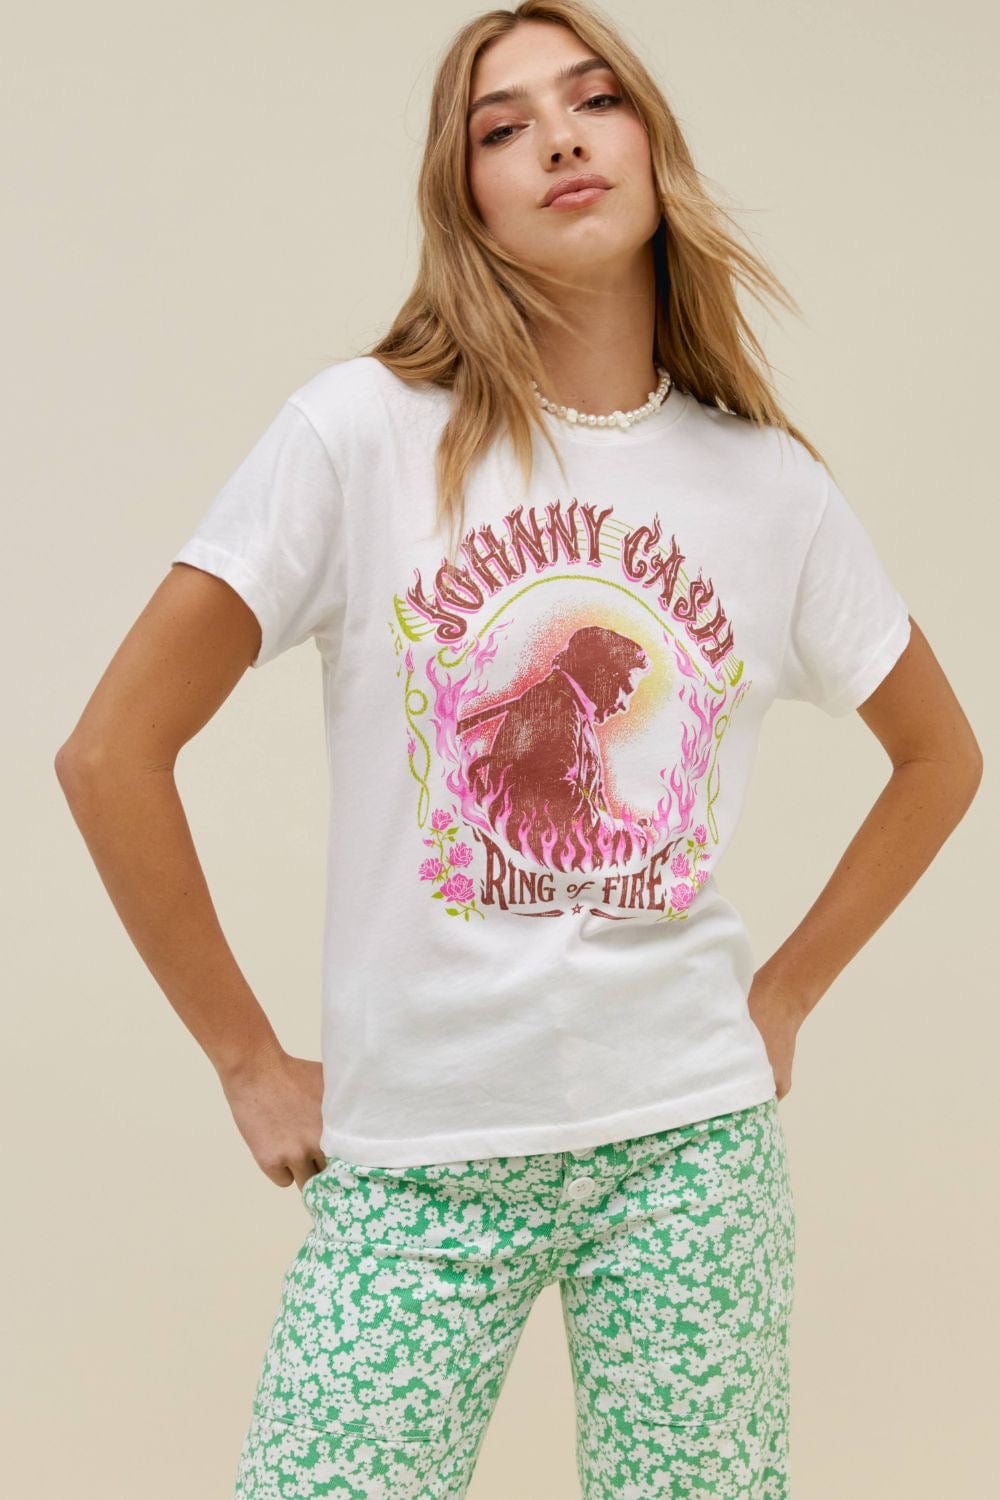 Daydreamer Johnny Cash "Ring of Fire" Tour Tee | Classic Country Music Tribute - Women's Shirts & Tops - Blooming Daily